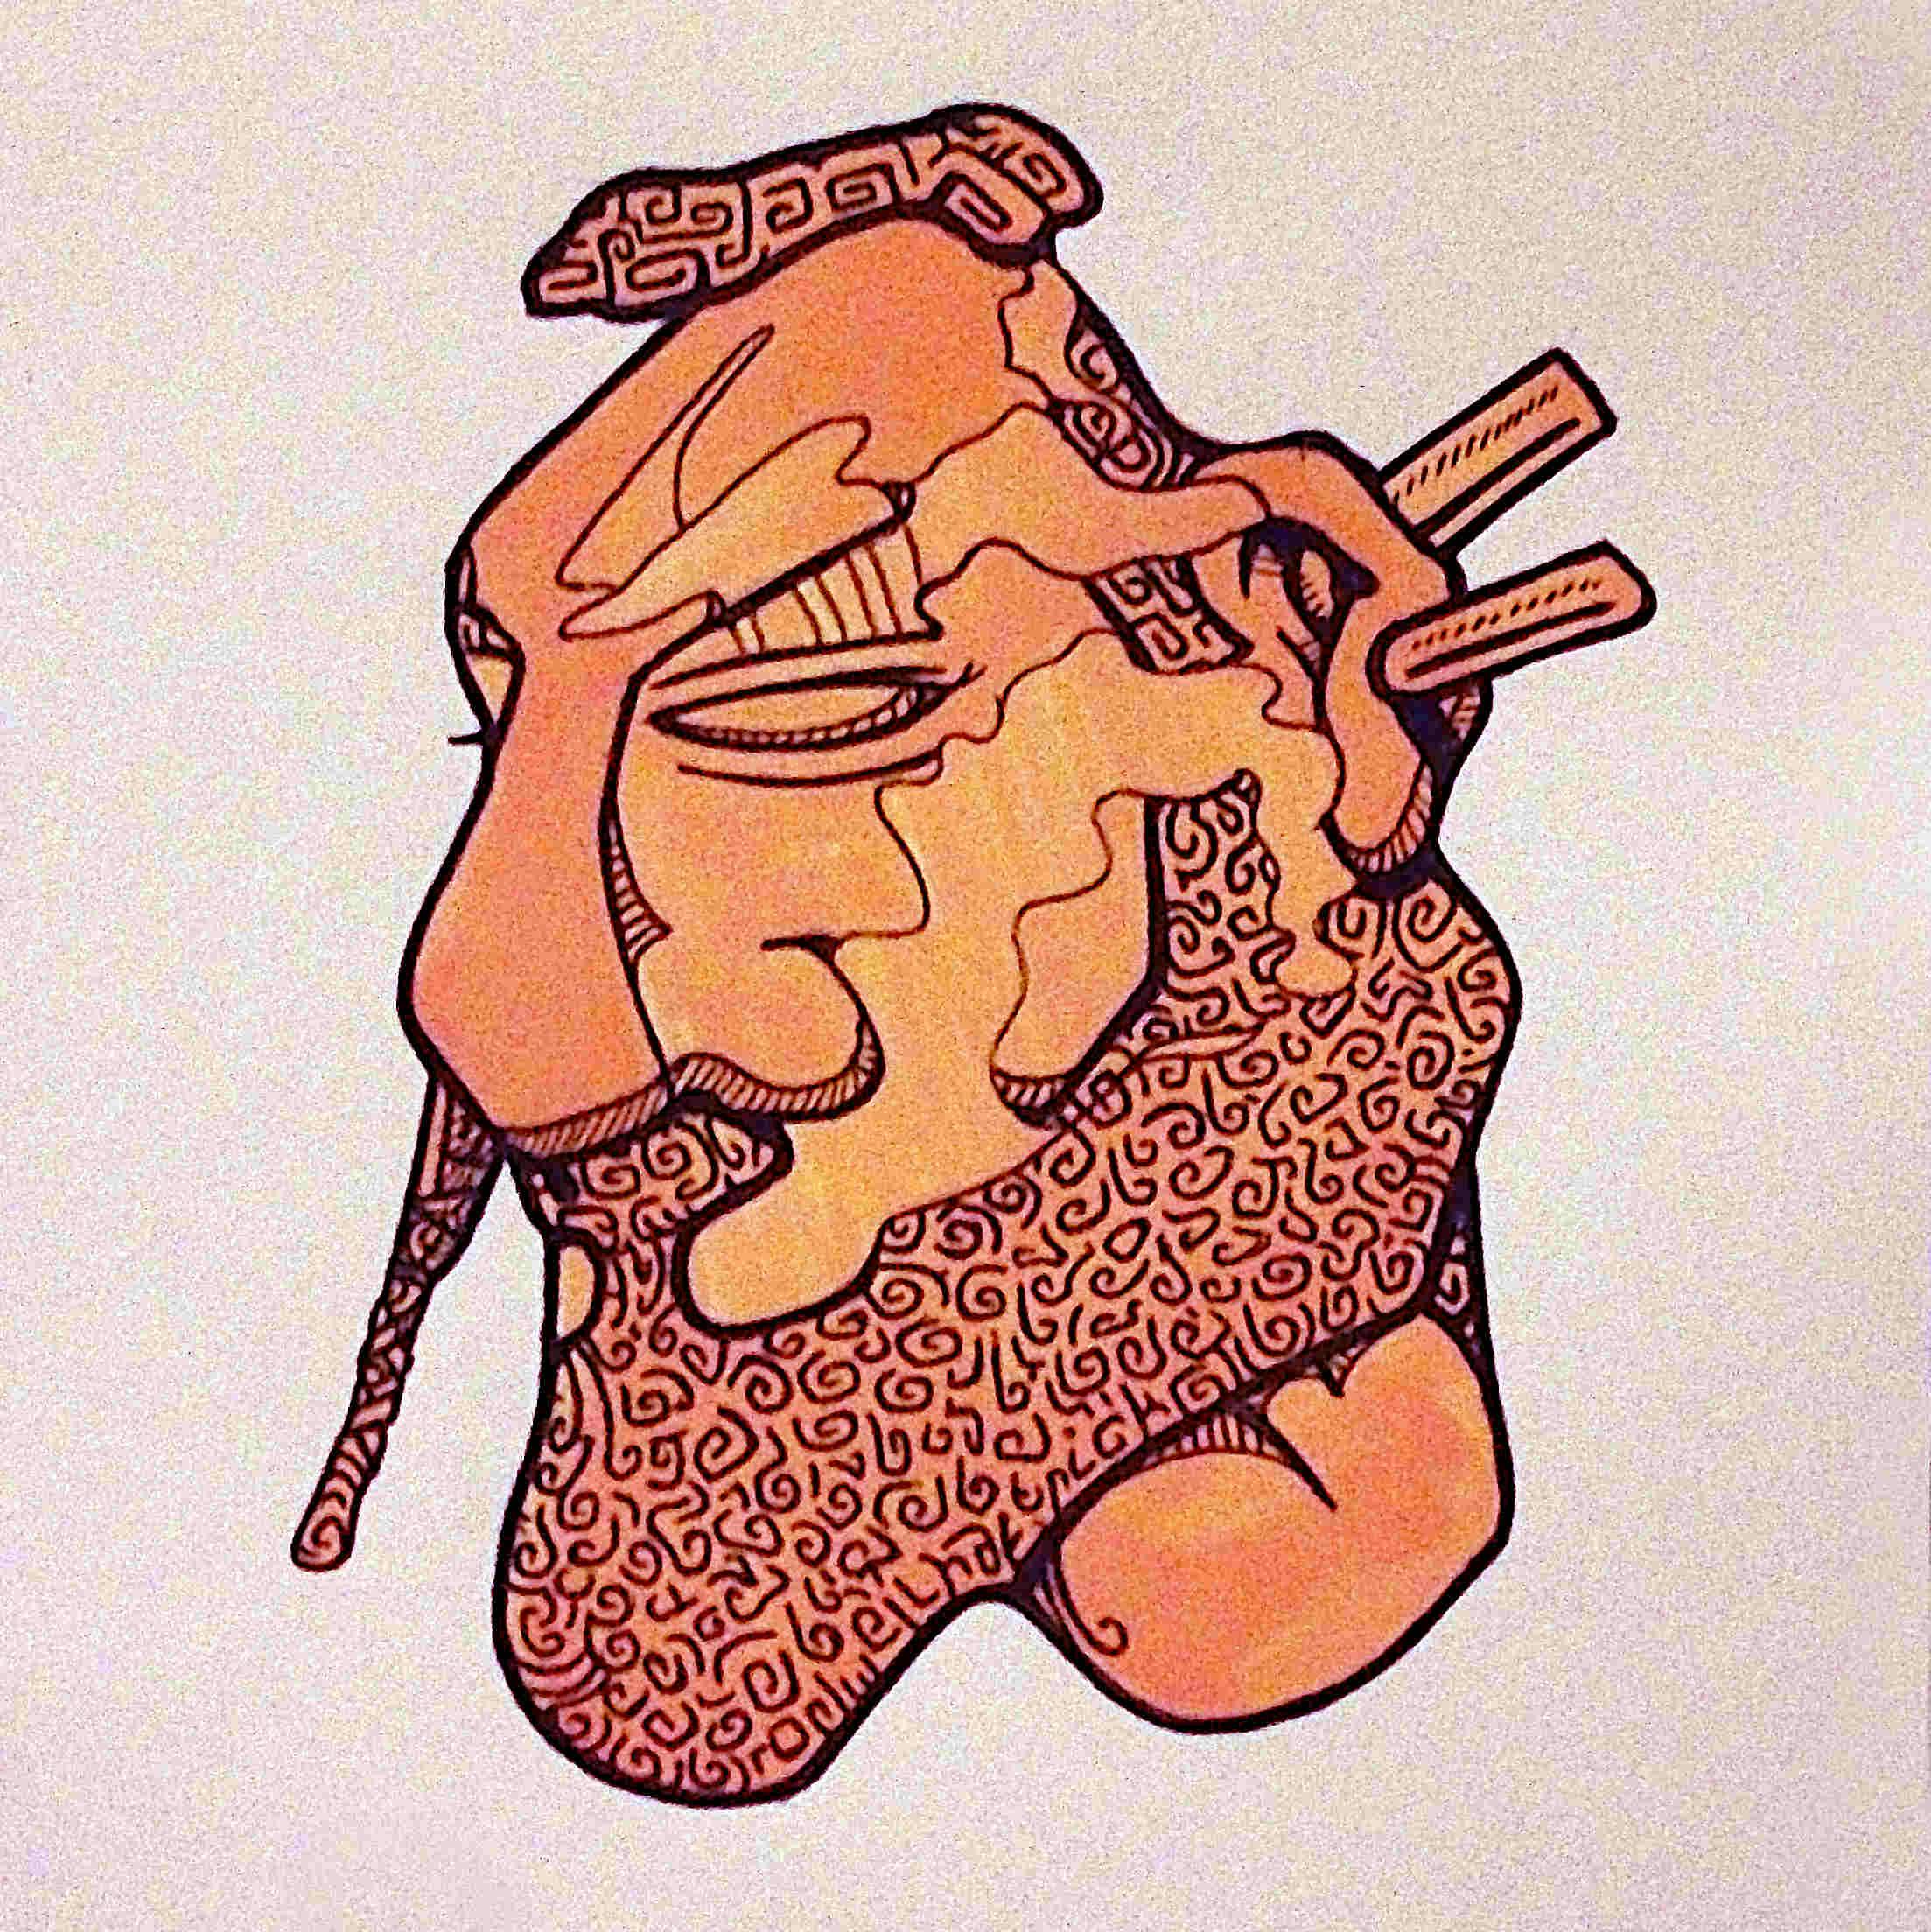 A coloured in drawing of a strange bearded face.